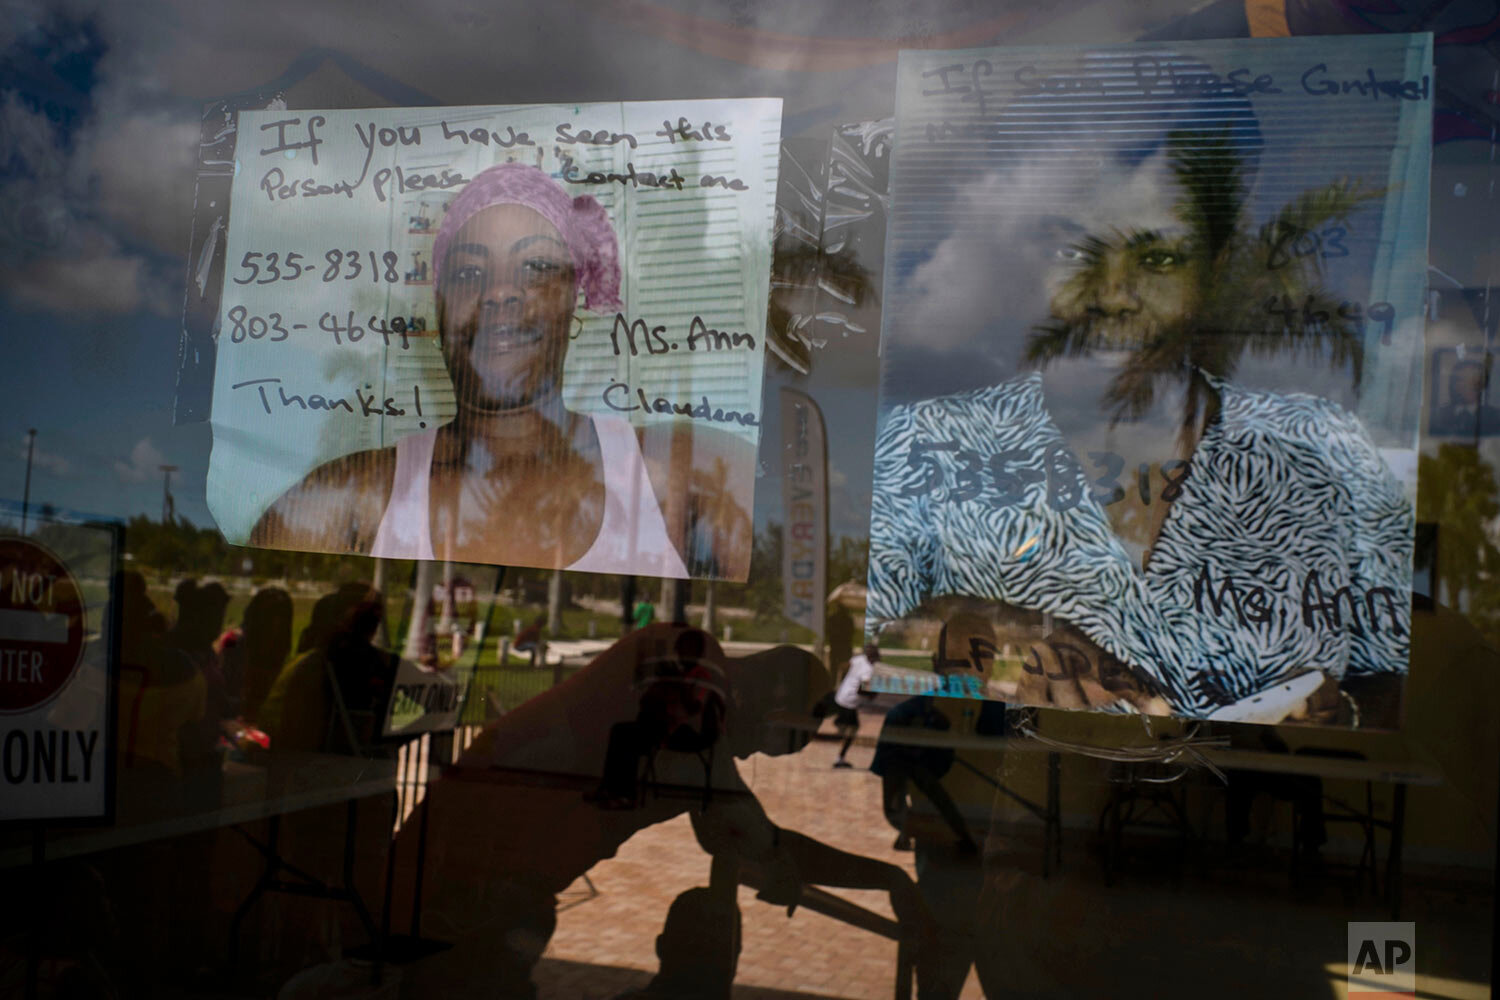  Photos of two women missing during Hurricane Dorian hang from the door of the shelter for displaced people from Abaco because of the destruction by Hurricane Dorian in Nassau, Bahamas, Saturday, Sept. 28, 2019. (AP Photo / Ramon Espinosa) 